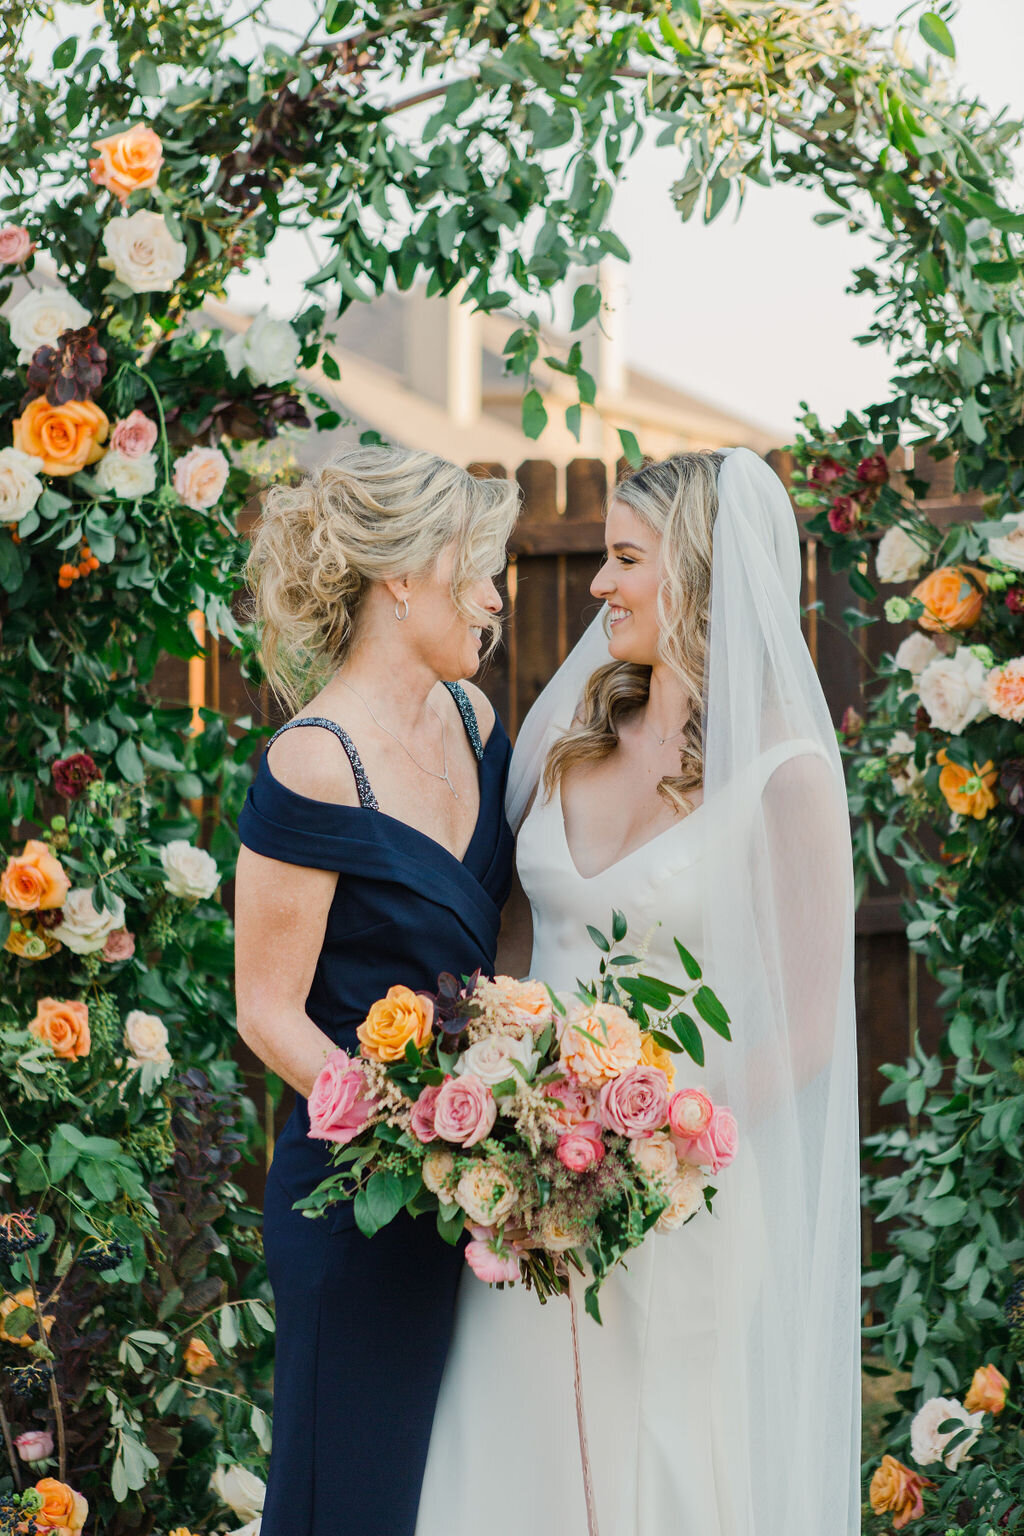 Mother of the Bride and Bride at Floral Arch Ceremony by Vella Nest Floral Design